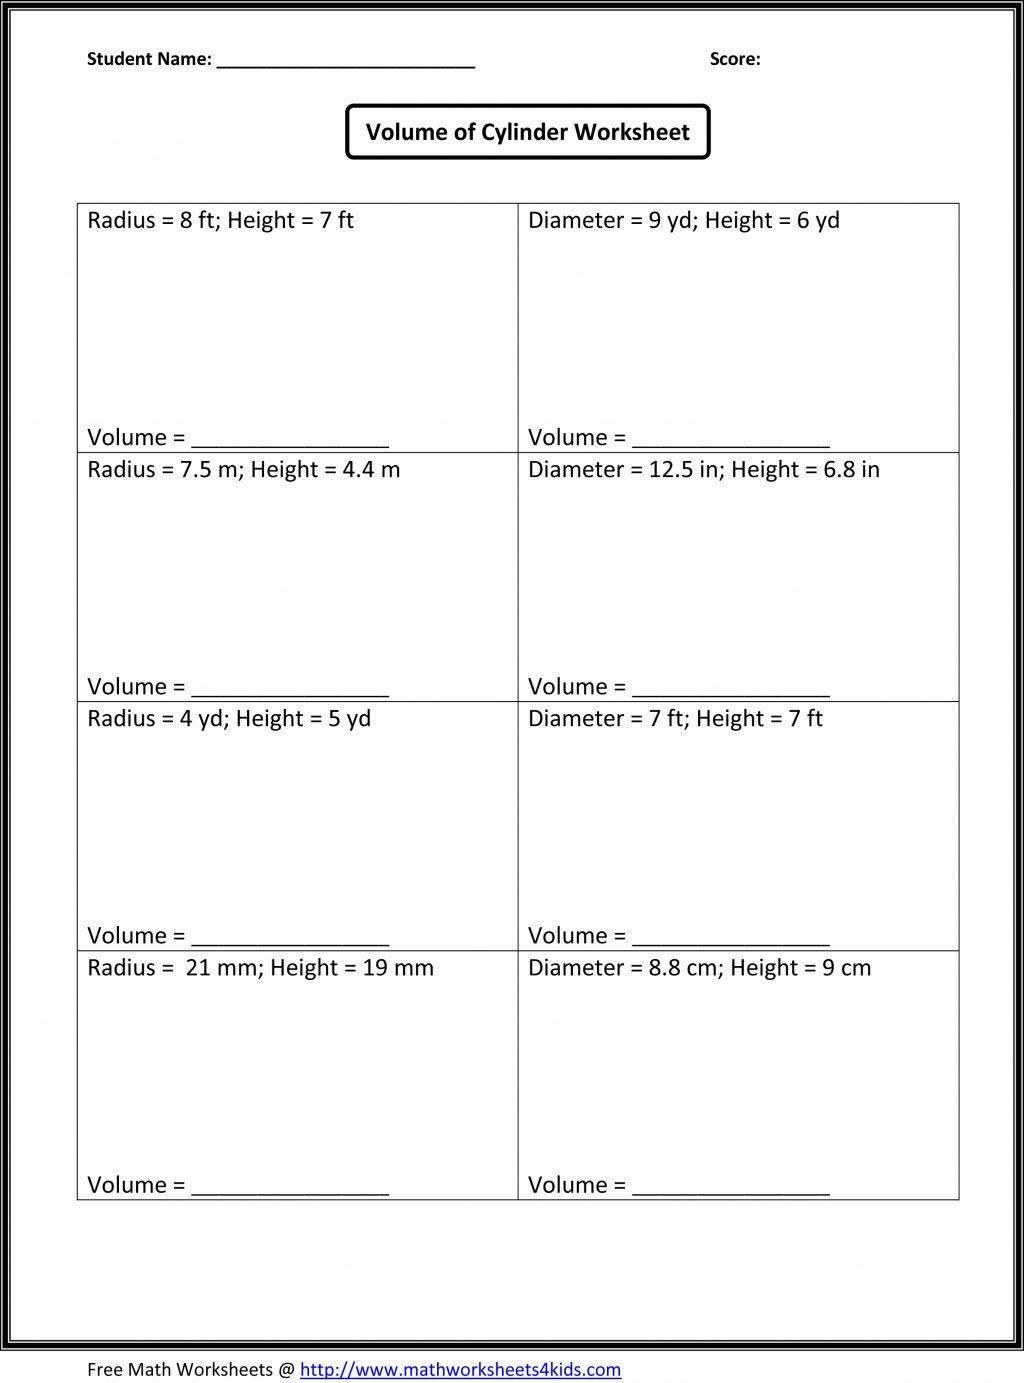 Common Core Math Worksheets For 5th Grade Homework